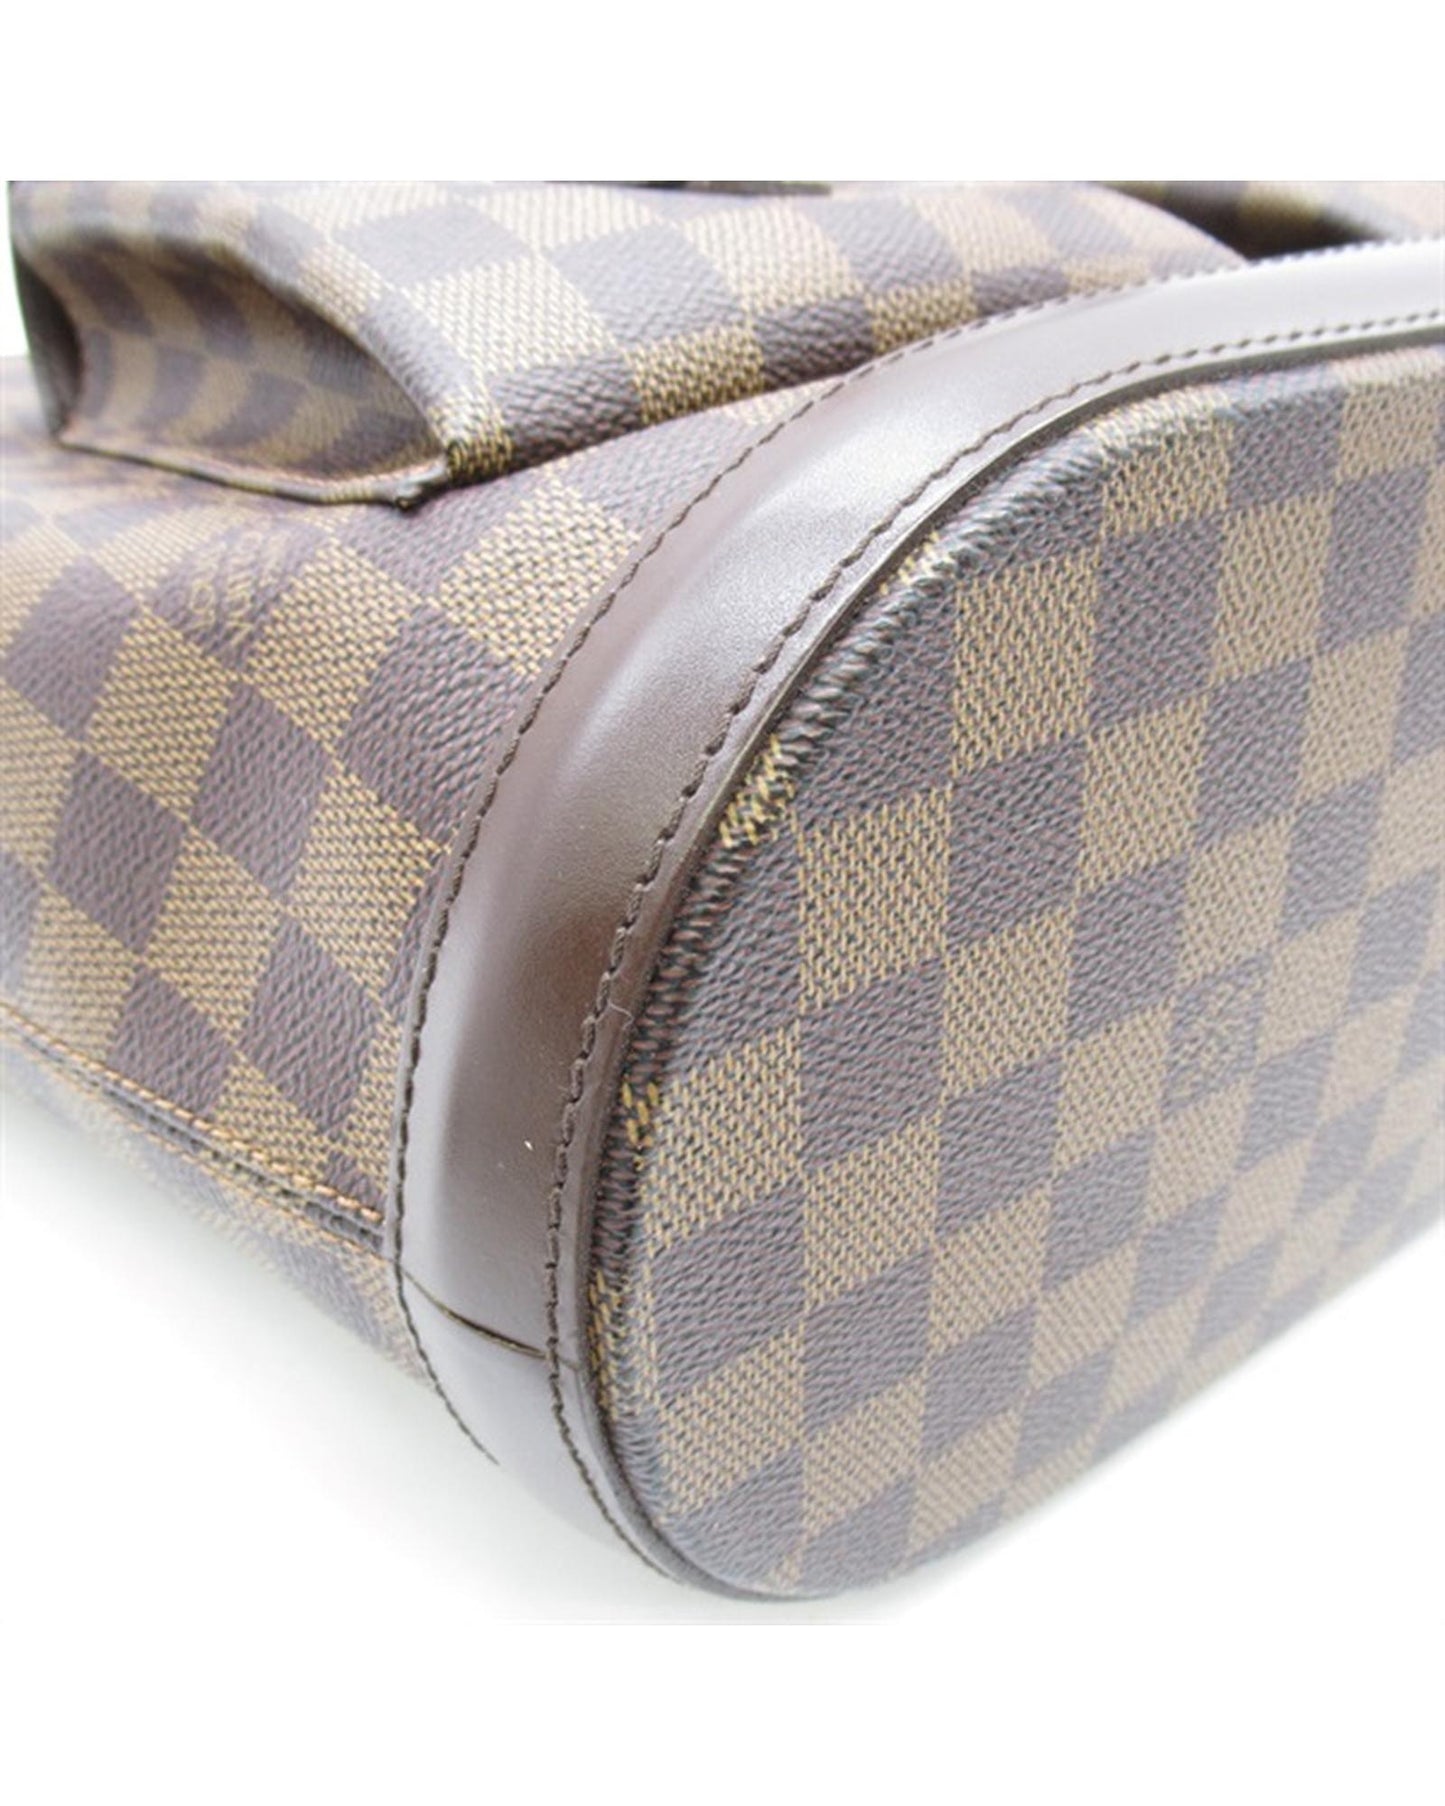 Louis Vuitton Women's Damier Ebene Manosque GM with Pouch Bag in Brown